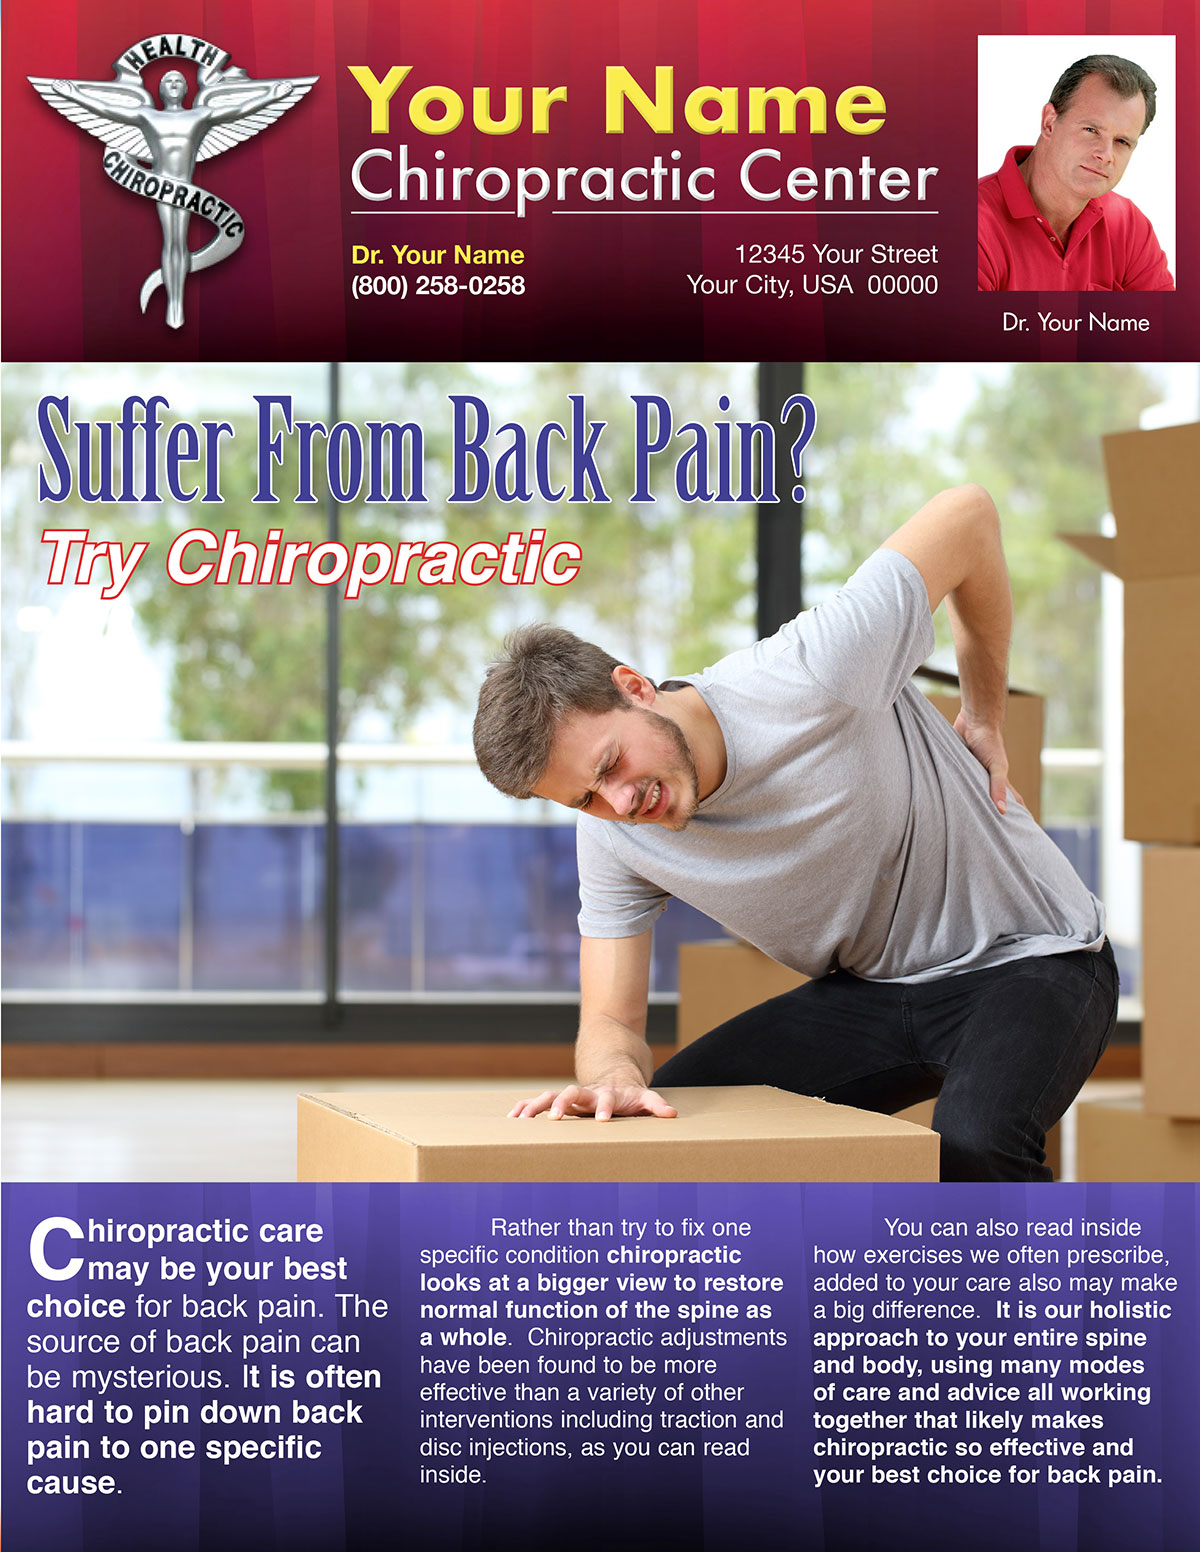 Suffer With Back Pain? Try Chiropractic